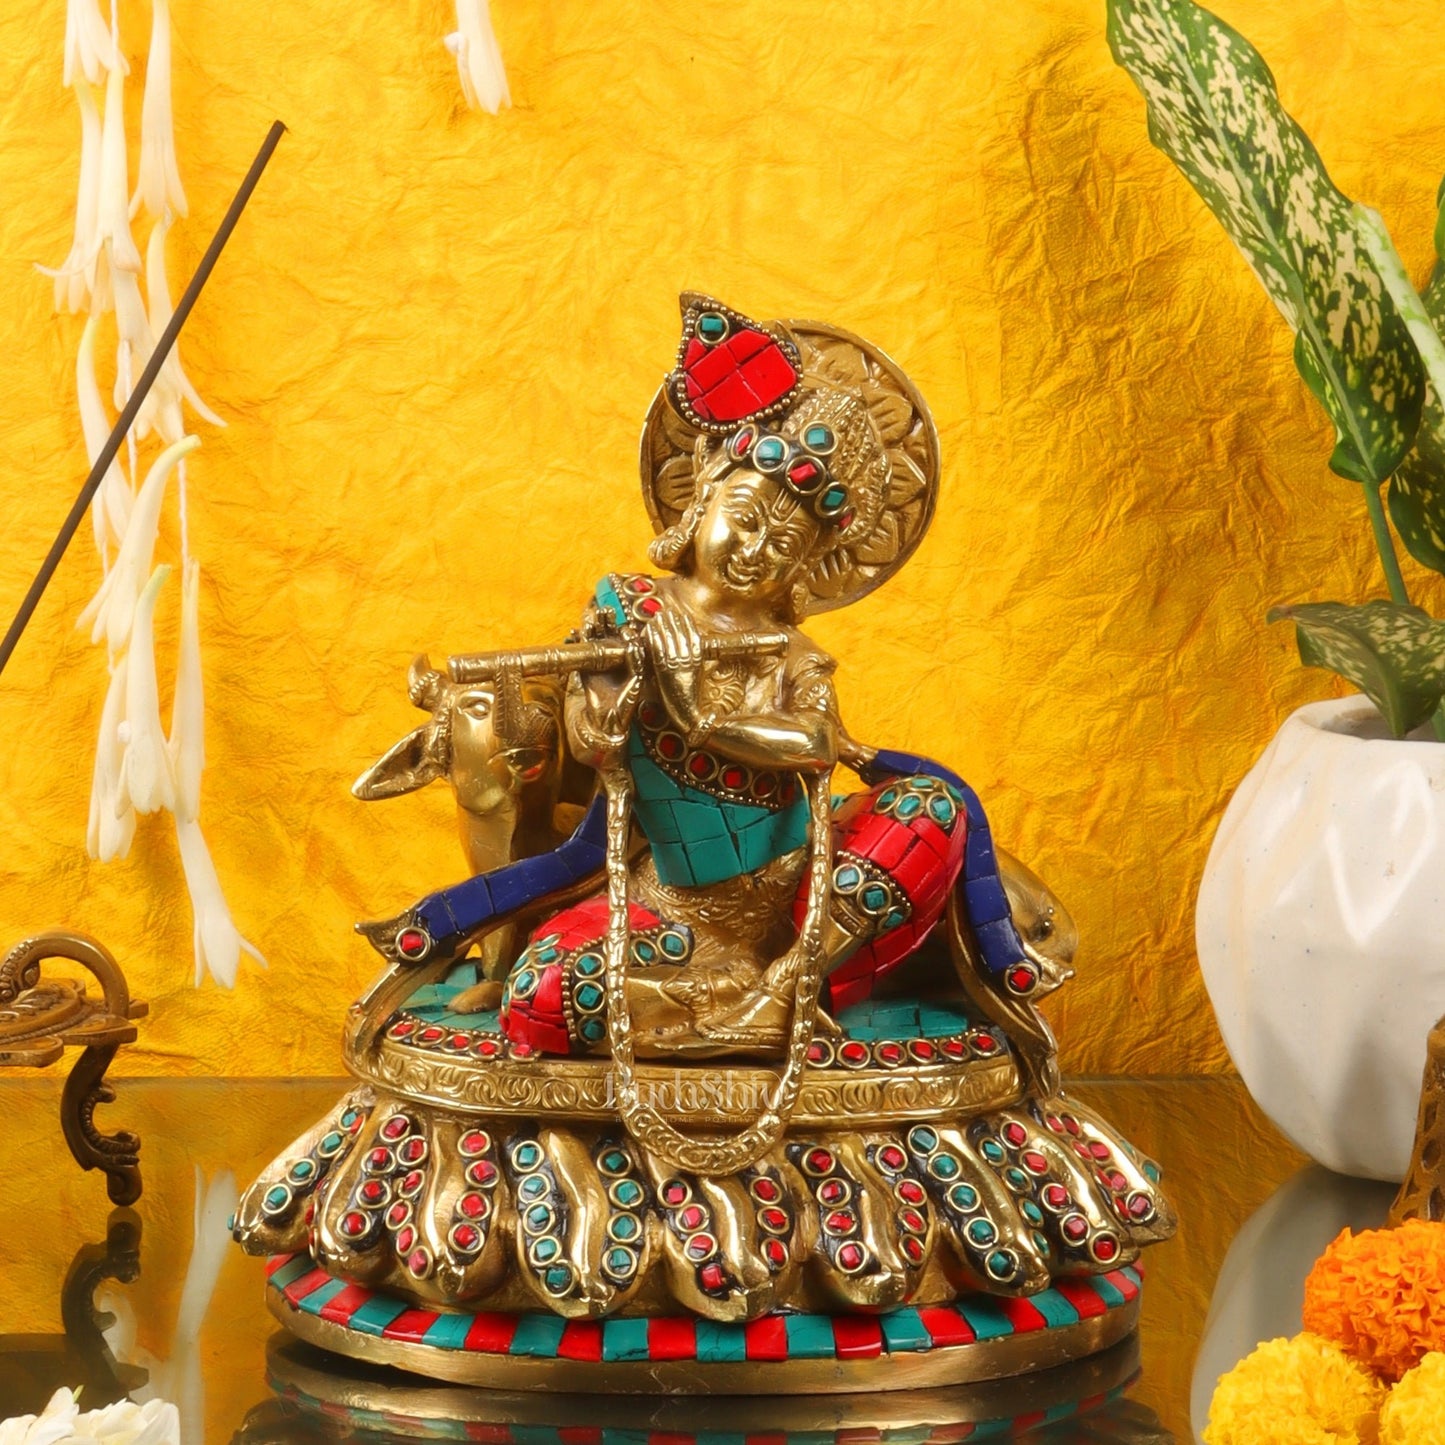 Lord krishna seated with cow brass idol with stonework 7.5 inch - Budhshiv.com